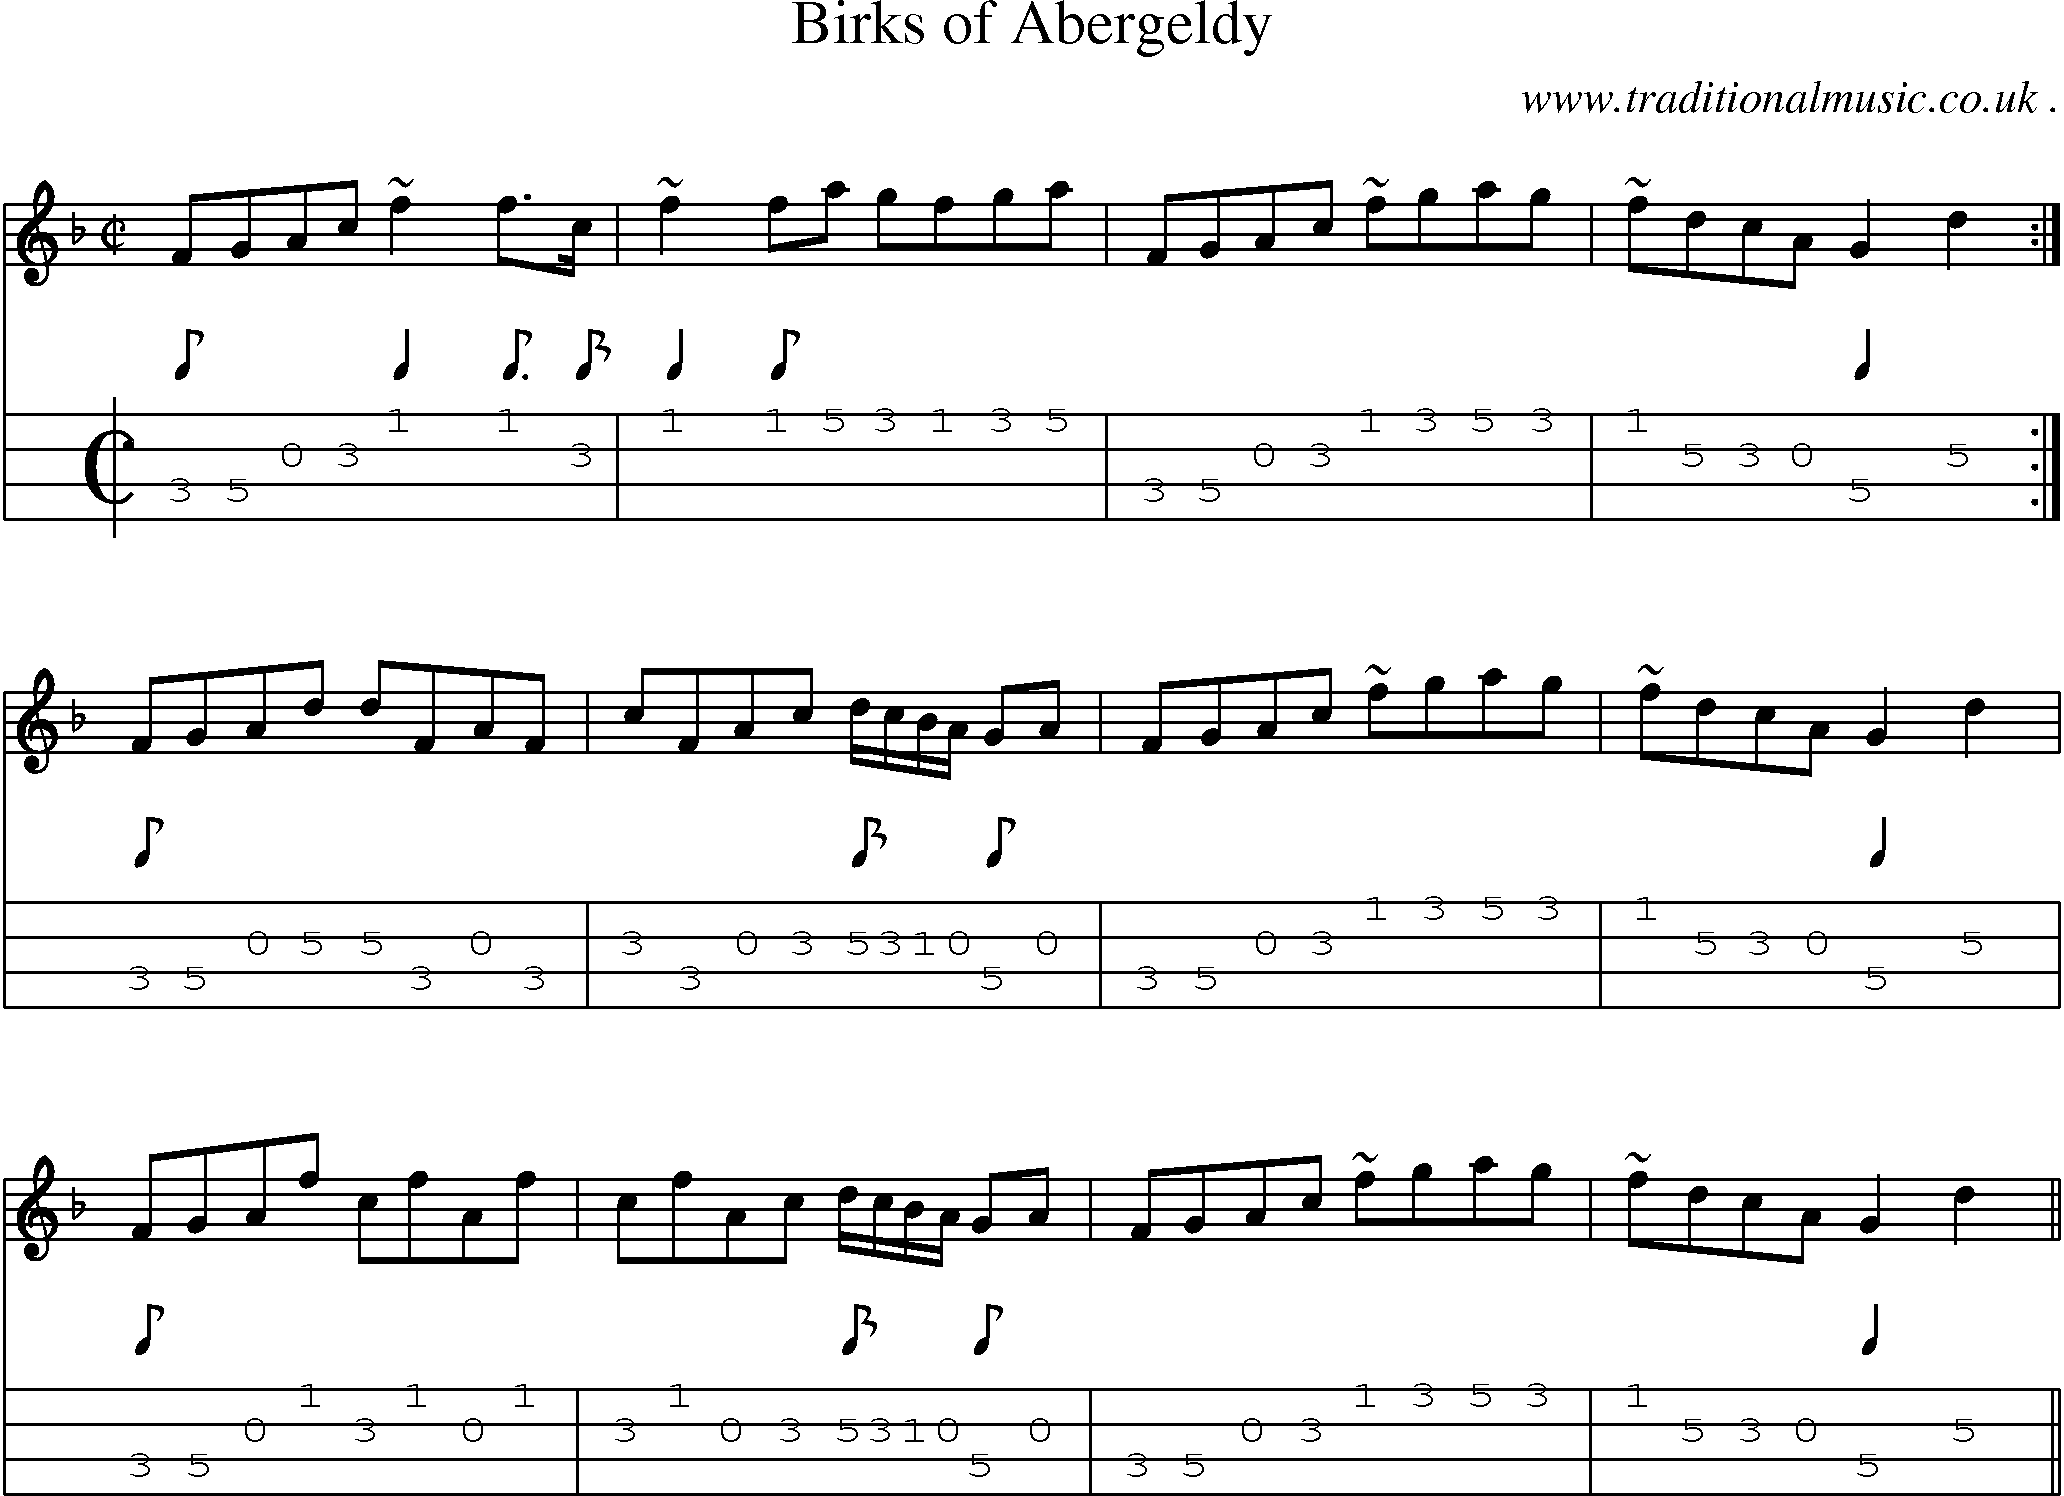 Sheet-music  score, Chords and Mandolin Tabs for Birks Of Abergeldy